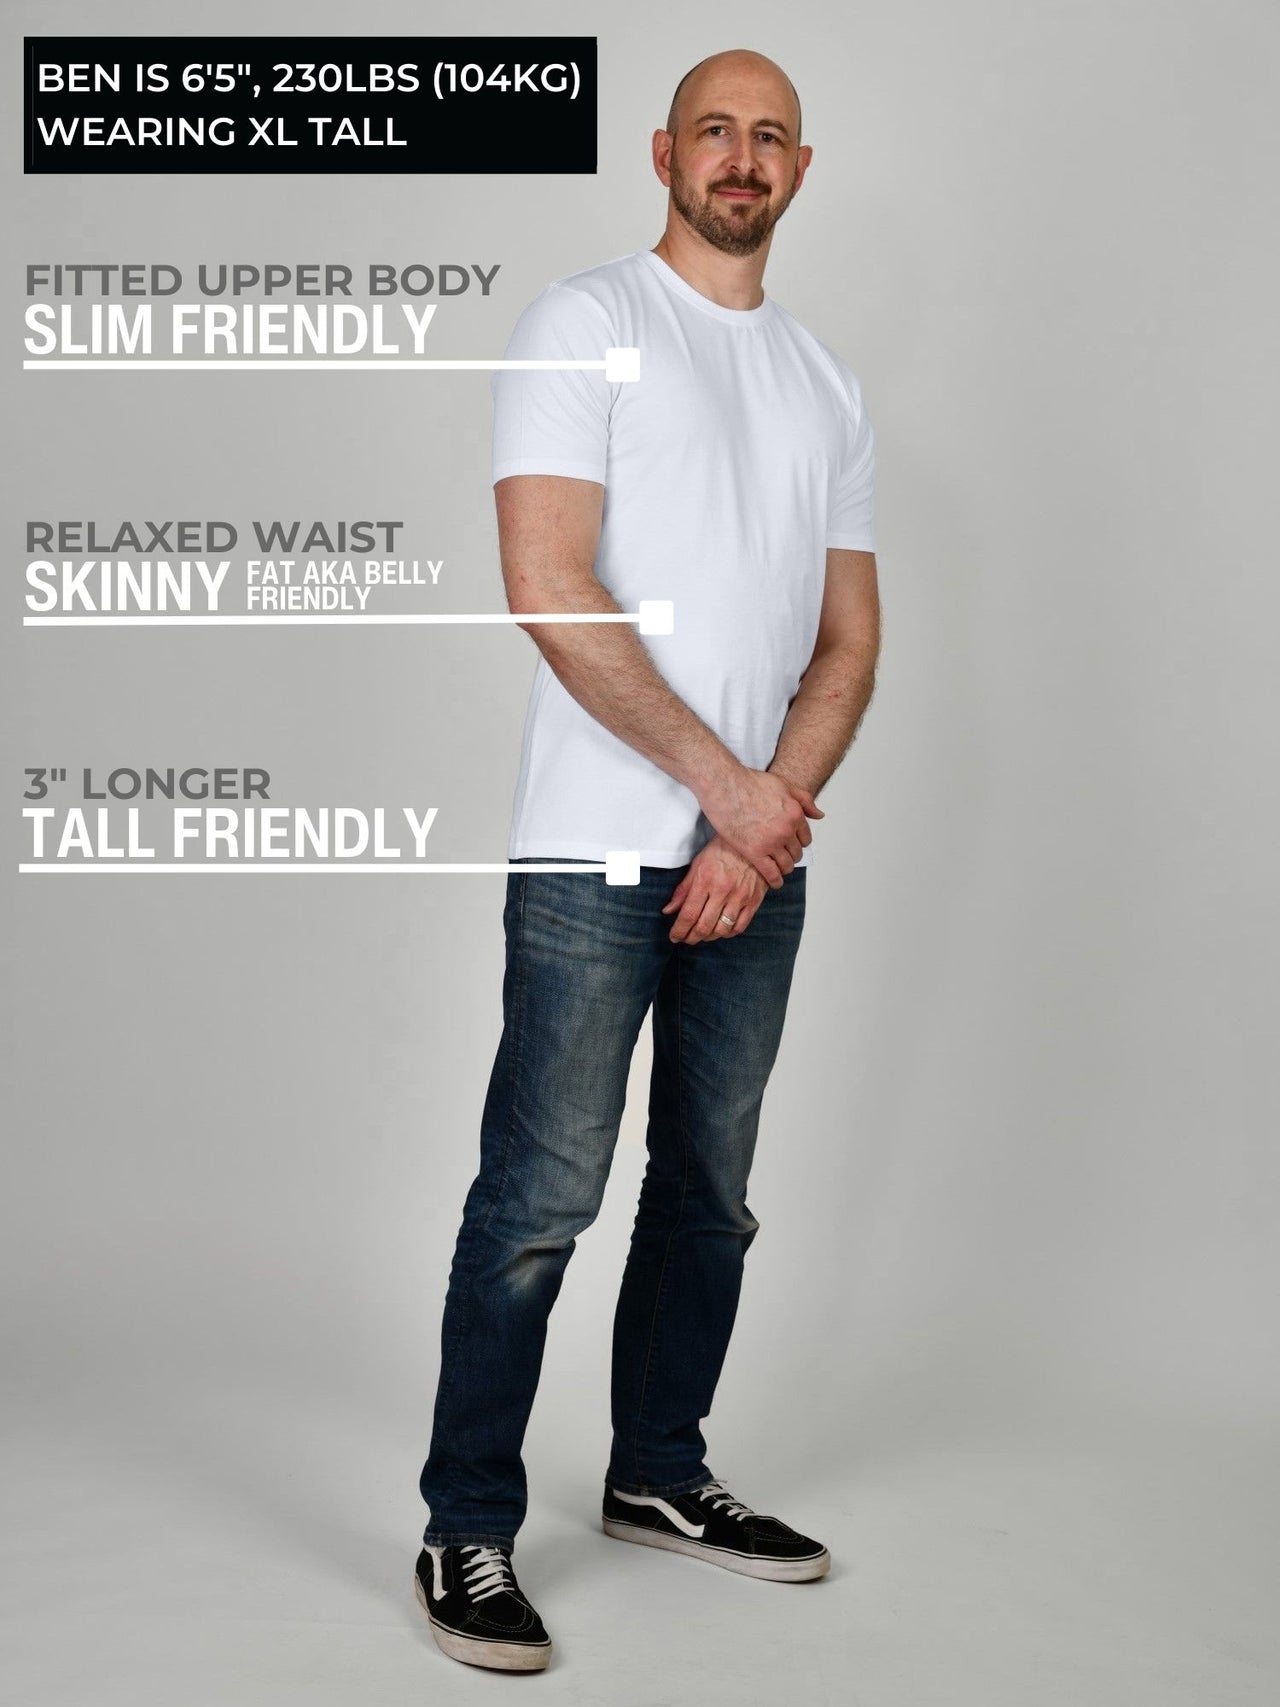 A head to toe shot of a tall muscular guy wearing a white XL tall t-shirt.